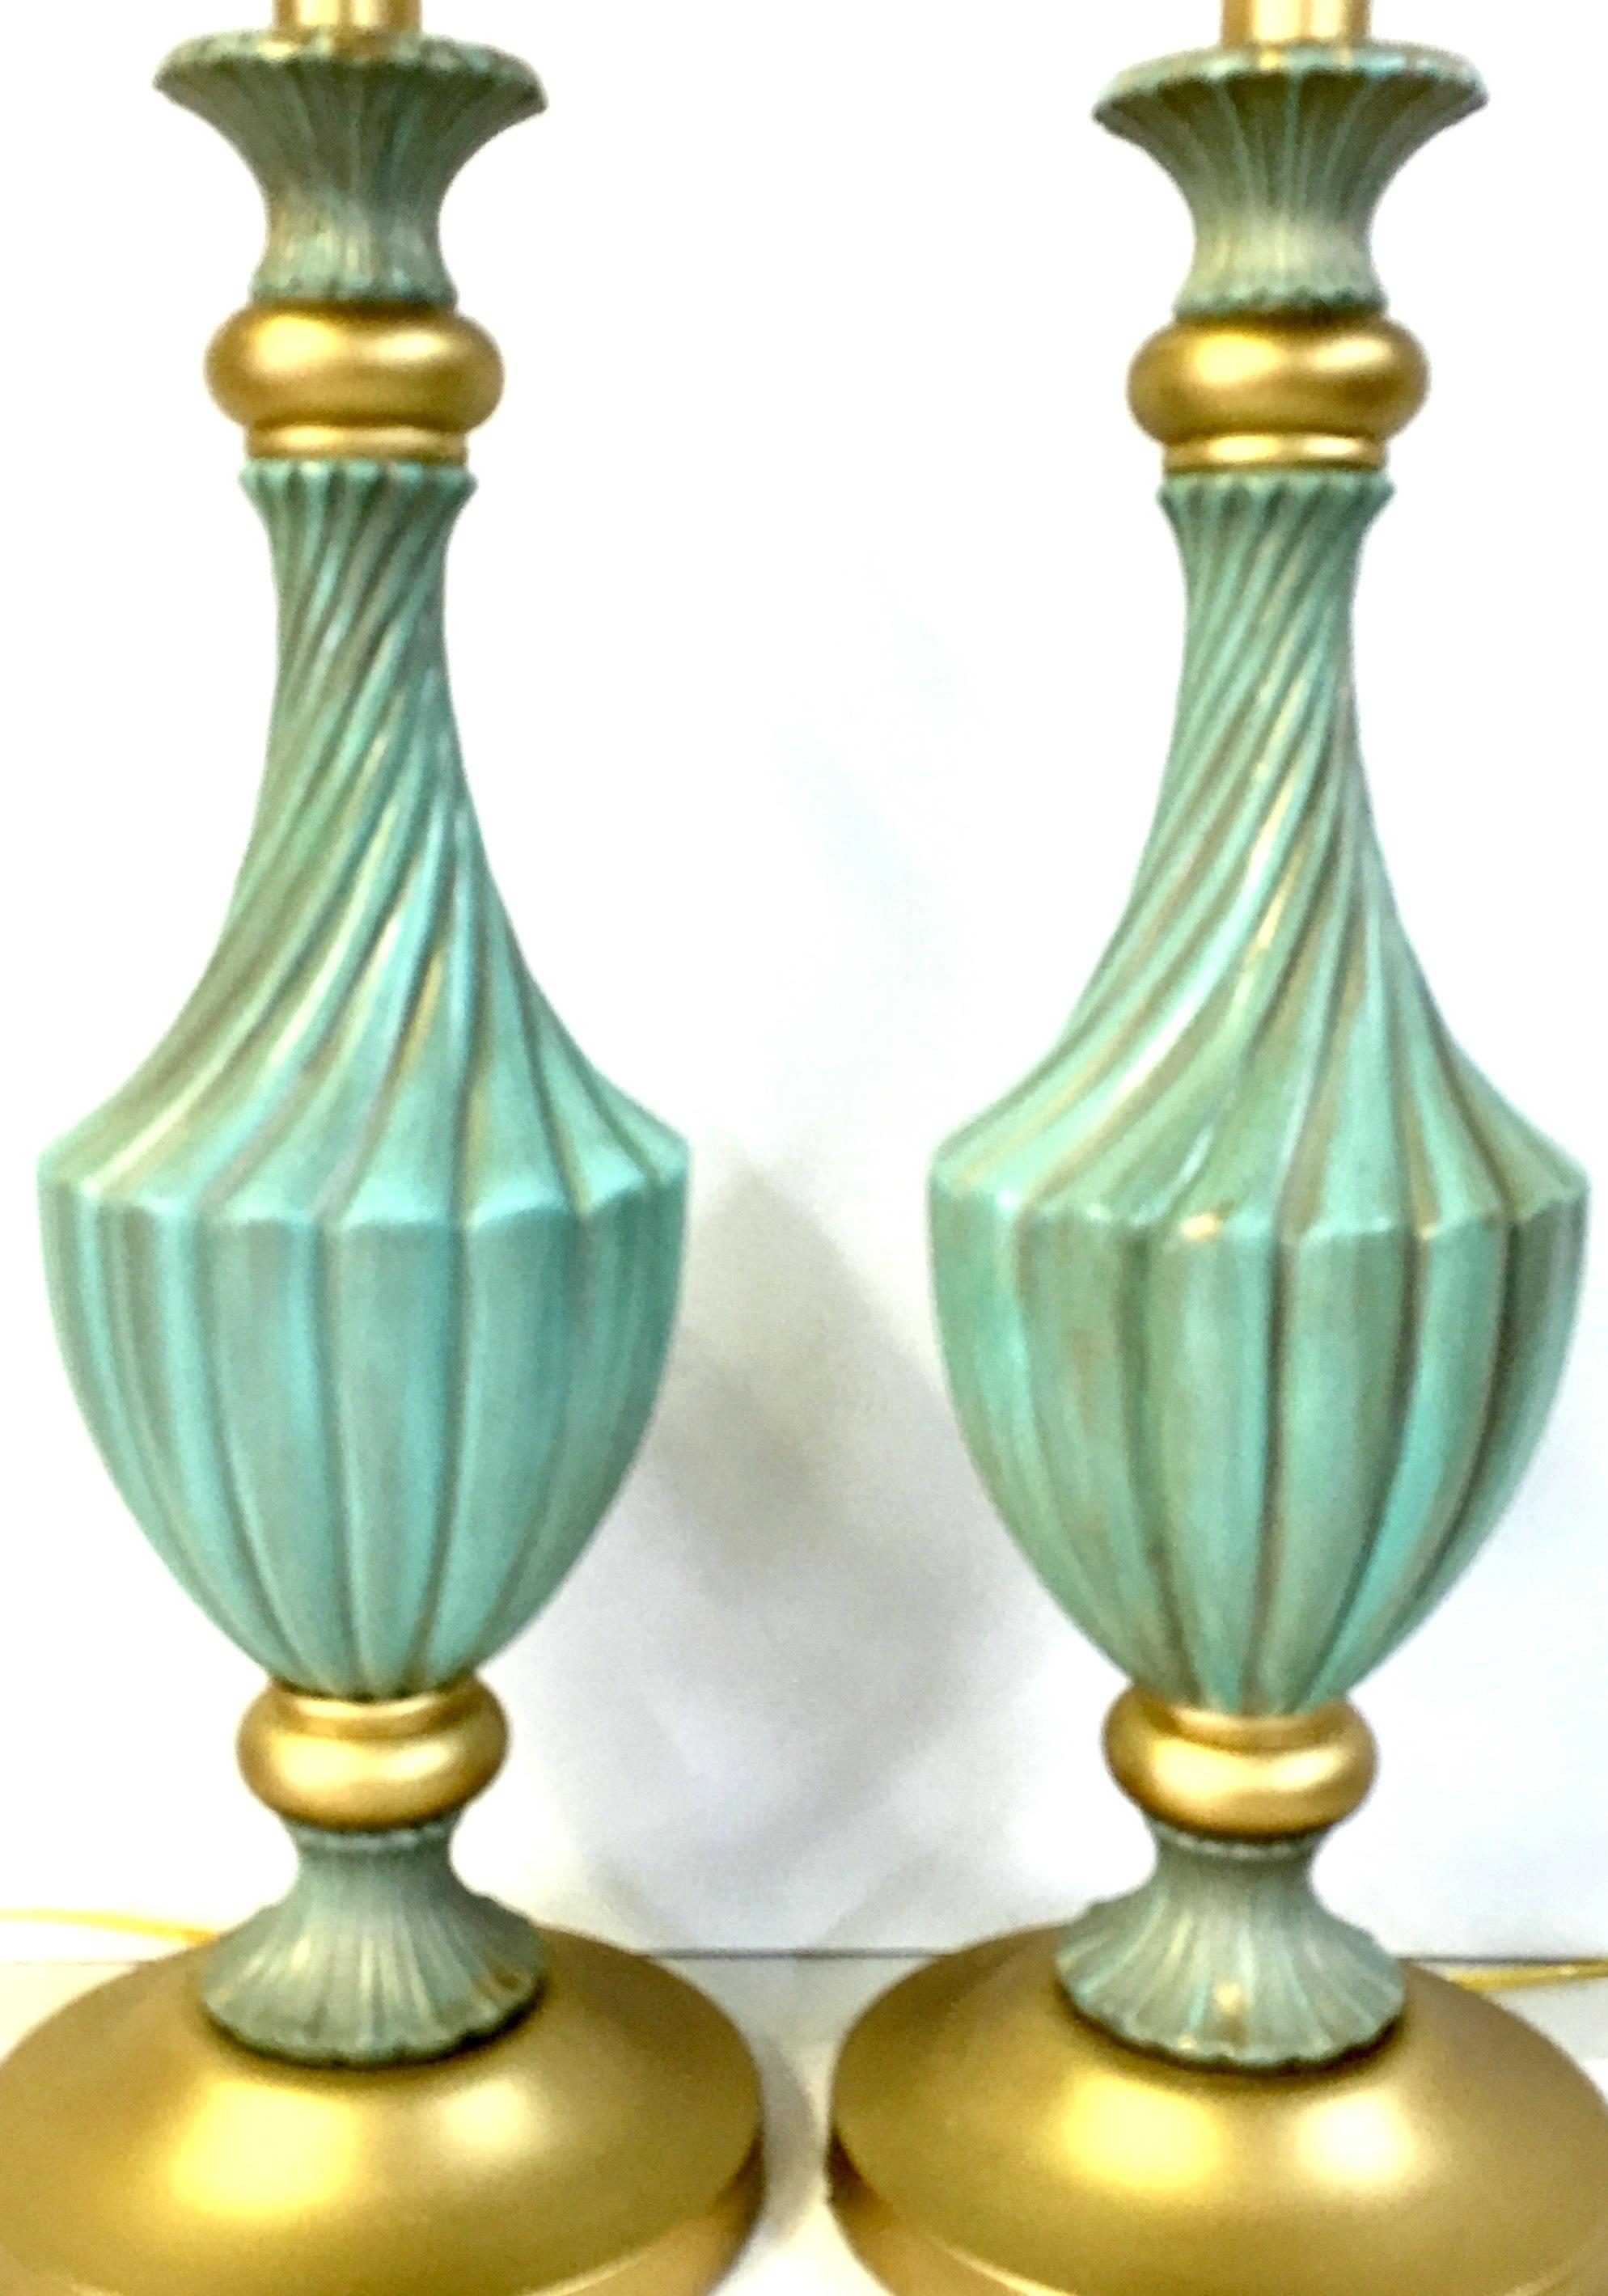 20th Century Pair of Neoclassical Style Ceramic & Brass Lamps by, Stiffel For Sale 1